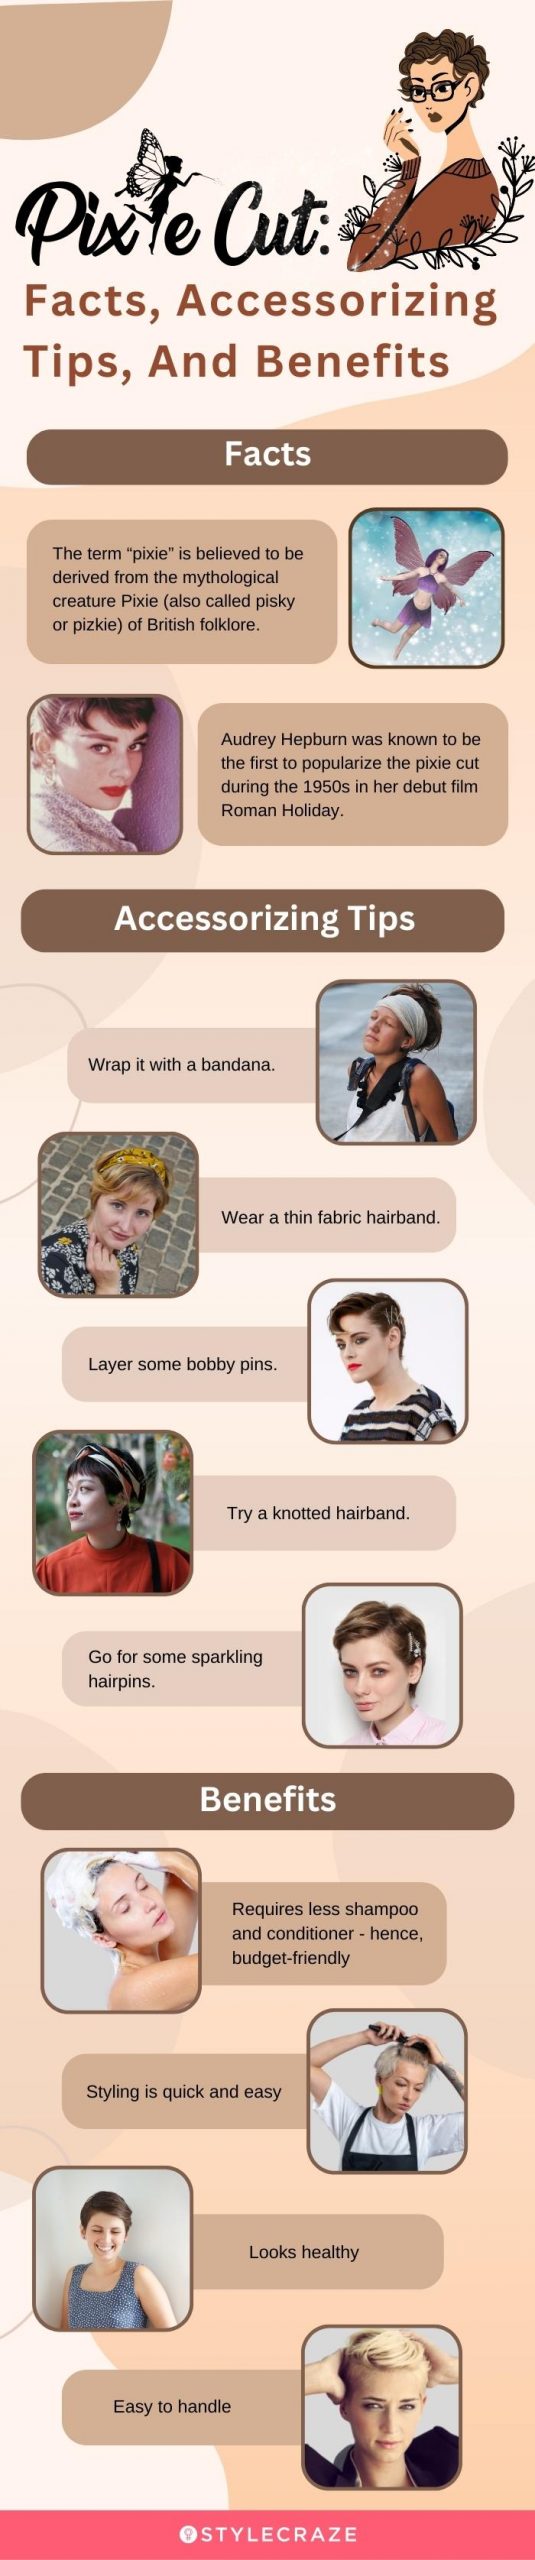 pixie cut facts, accessorizing tips and benefits [infographic]